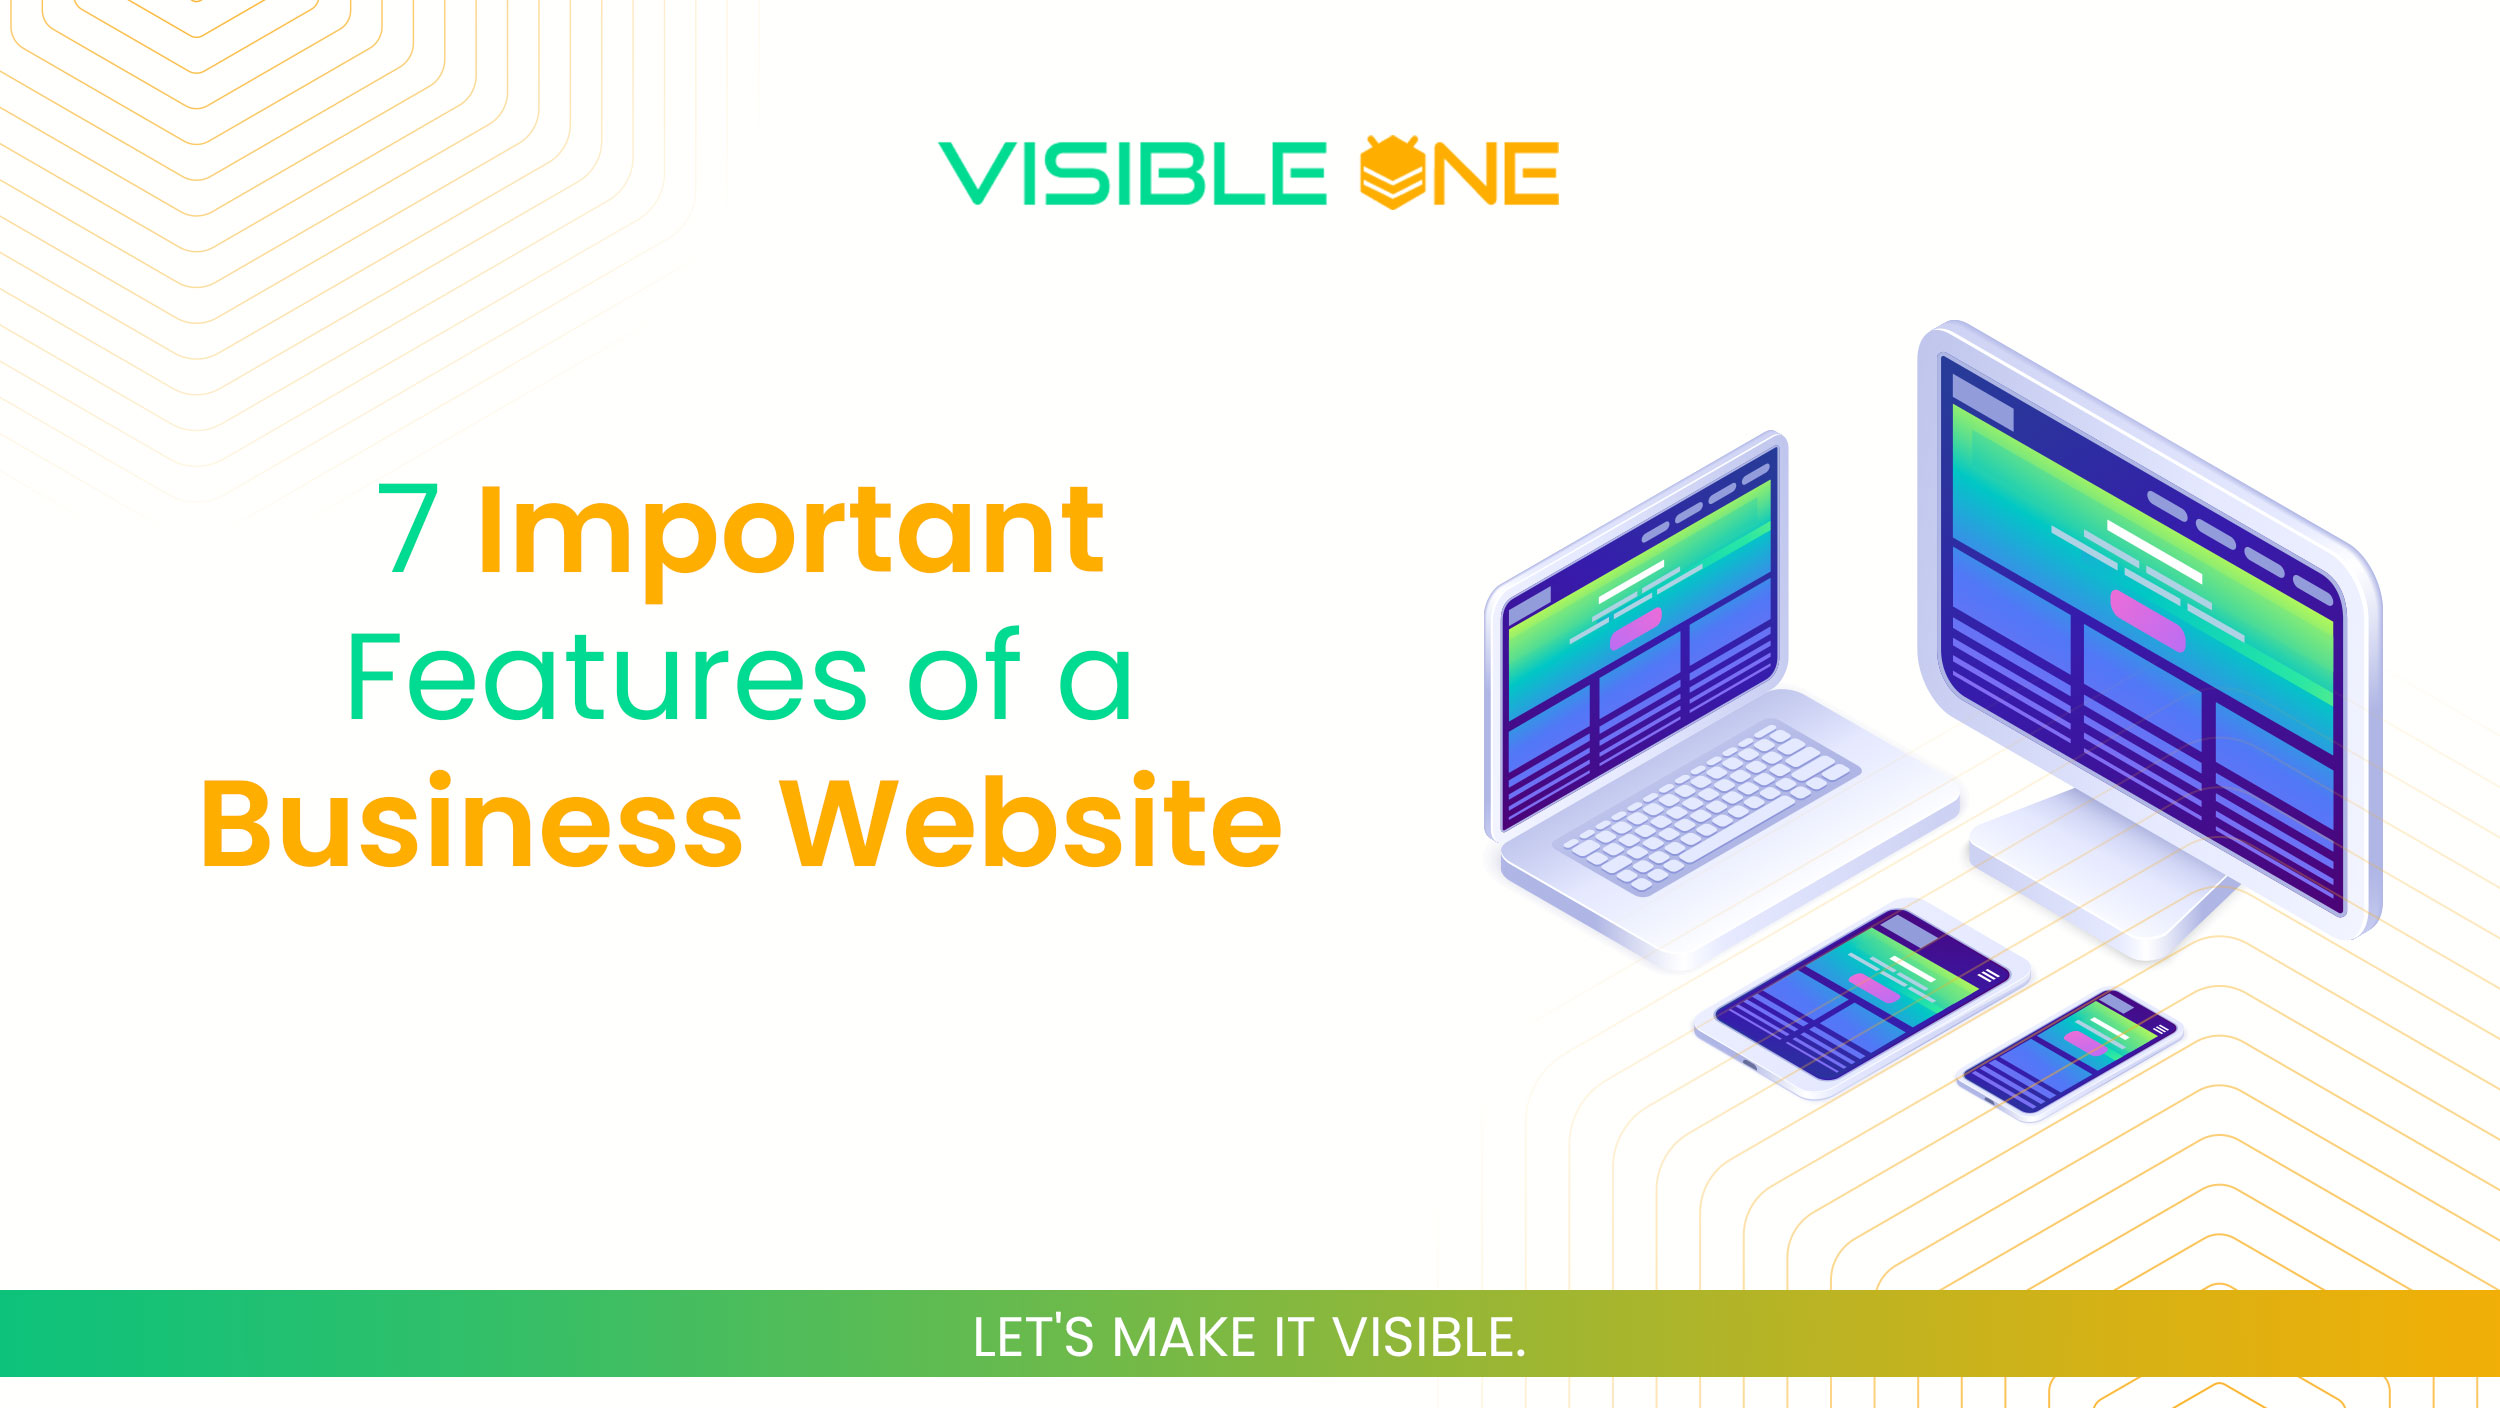 7 Important Features of a Business Website